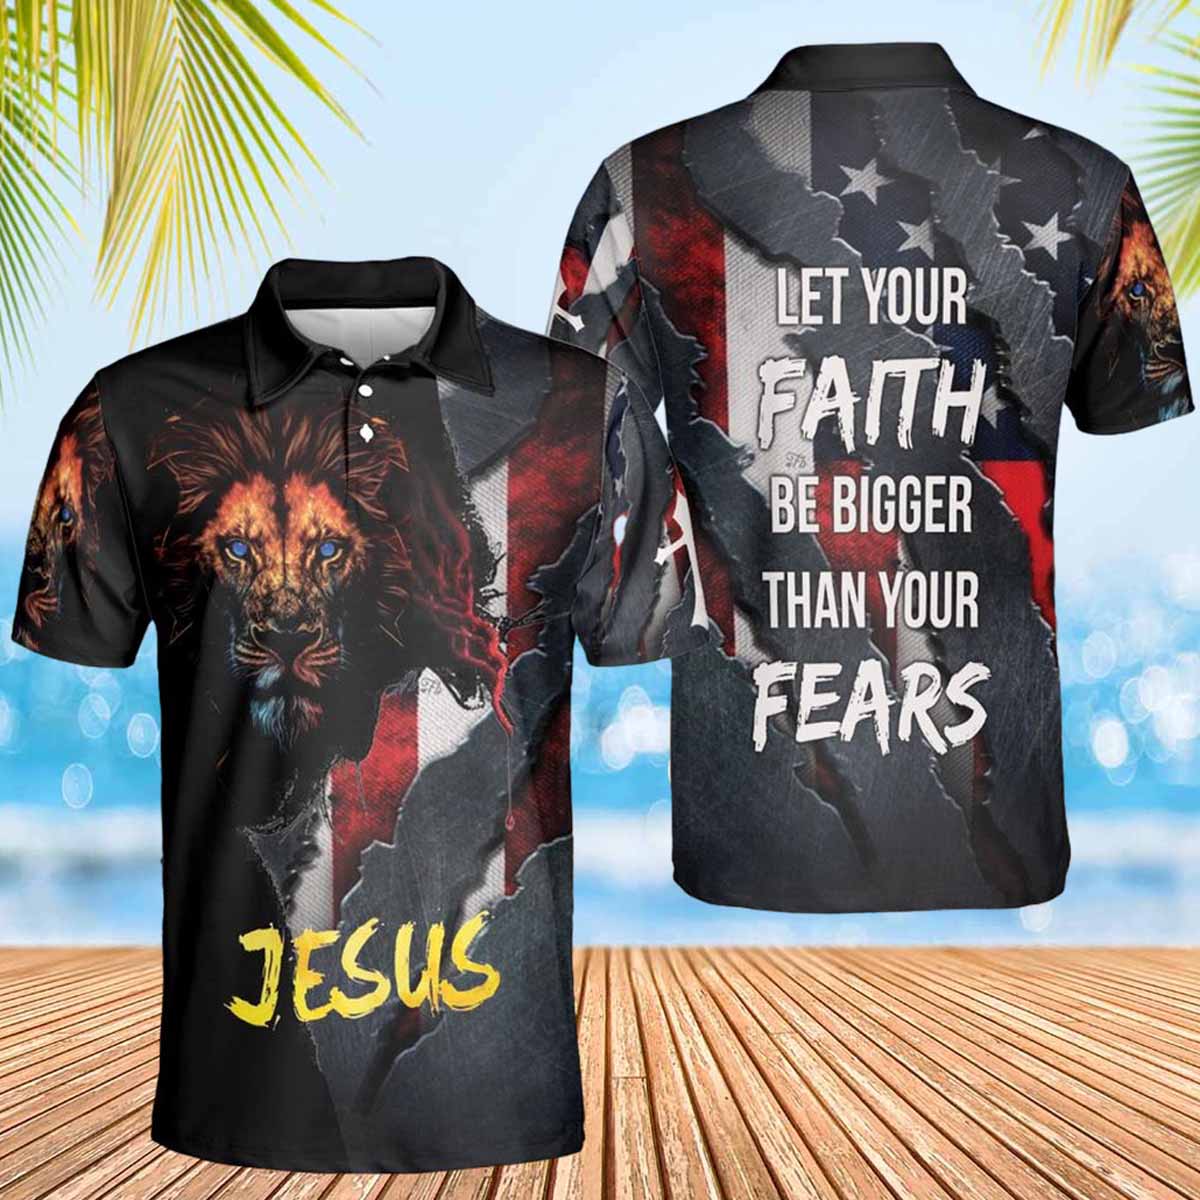 Jesus Lion Let's Your Faith Be Bigger Than Your Fears Jesus Polo Shirts - Christian Shirt For Men And Women